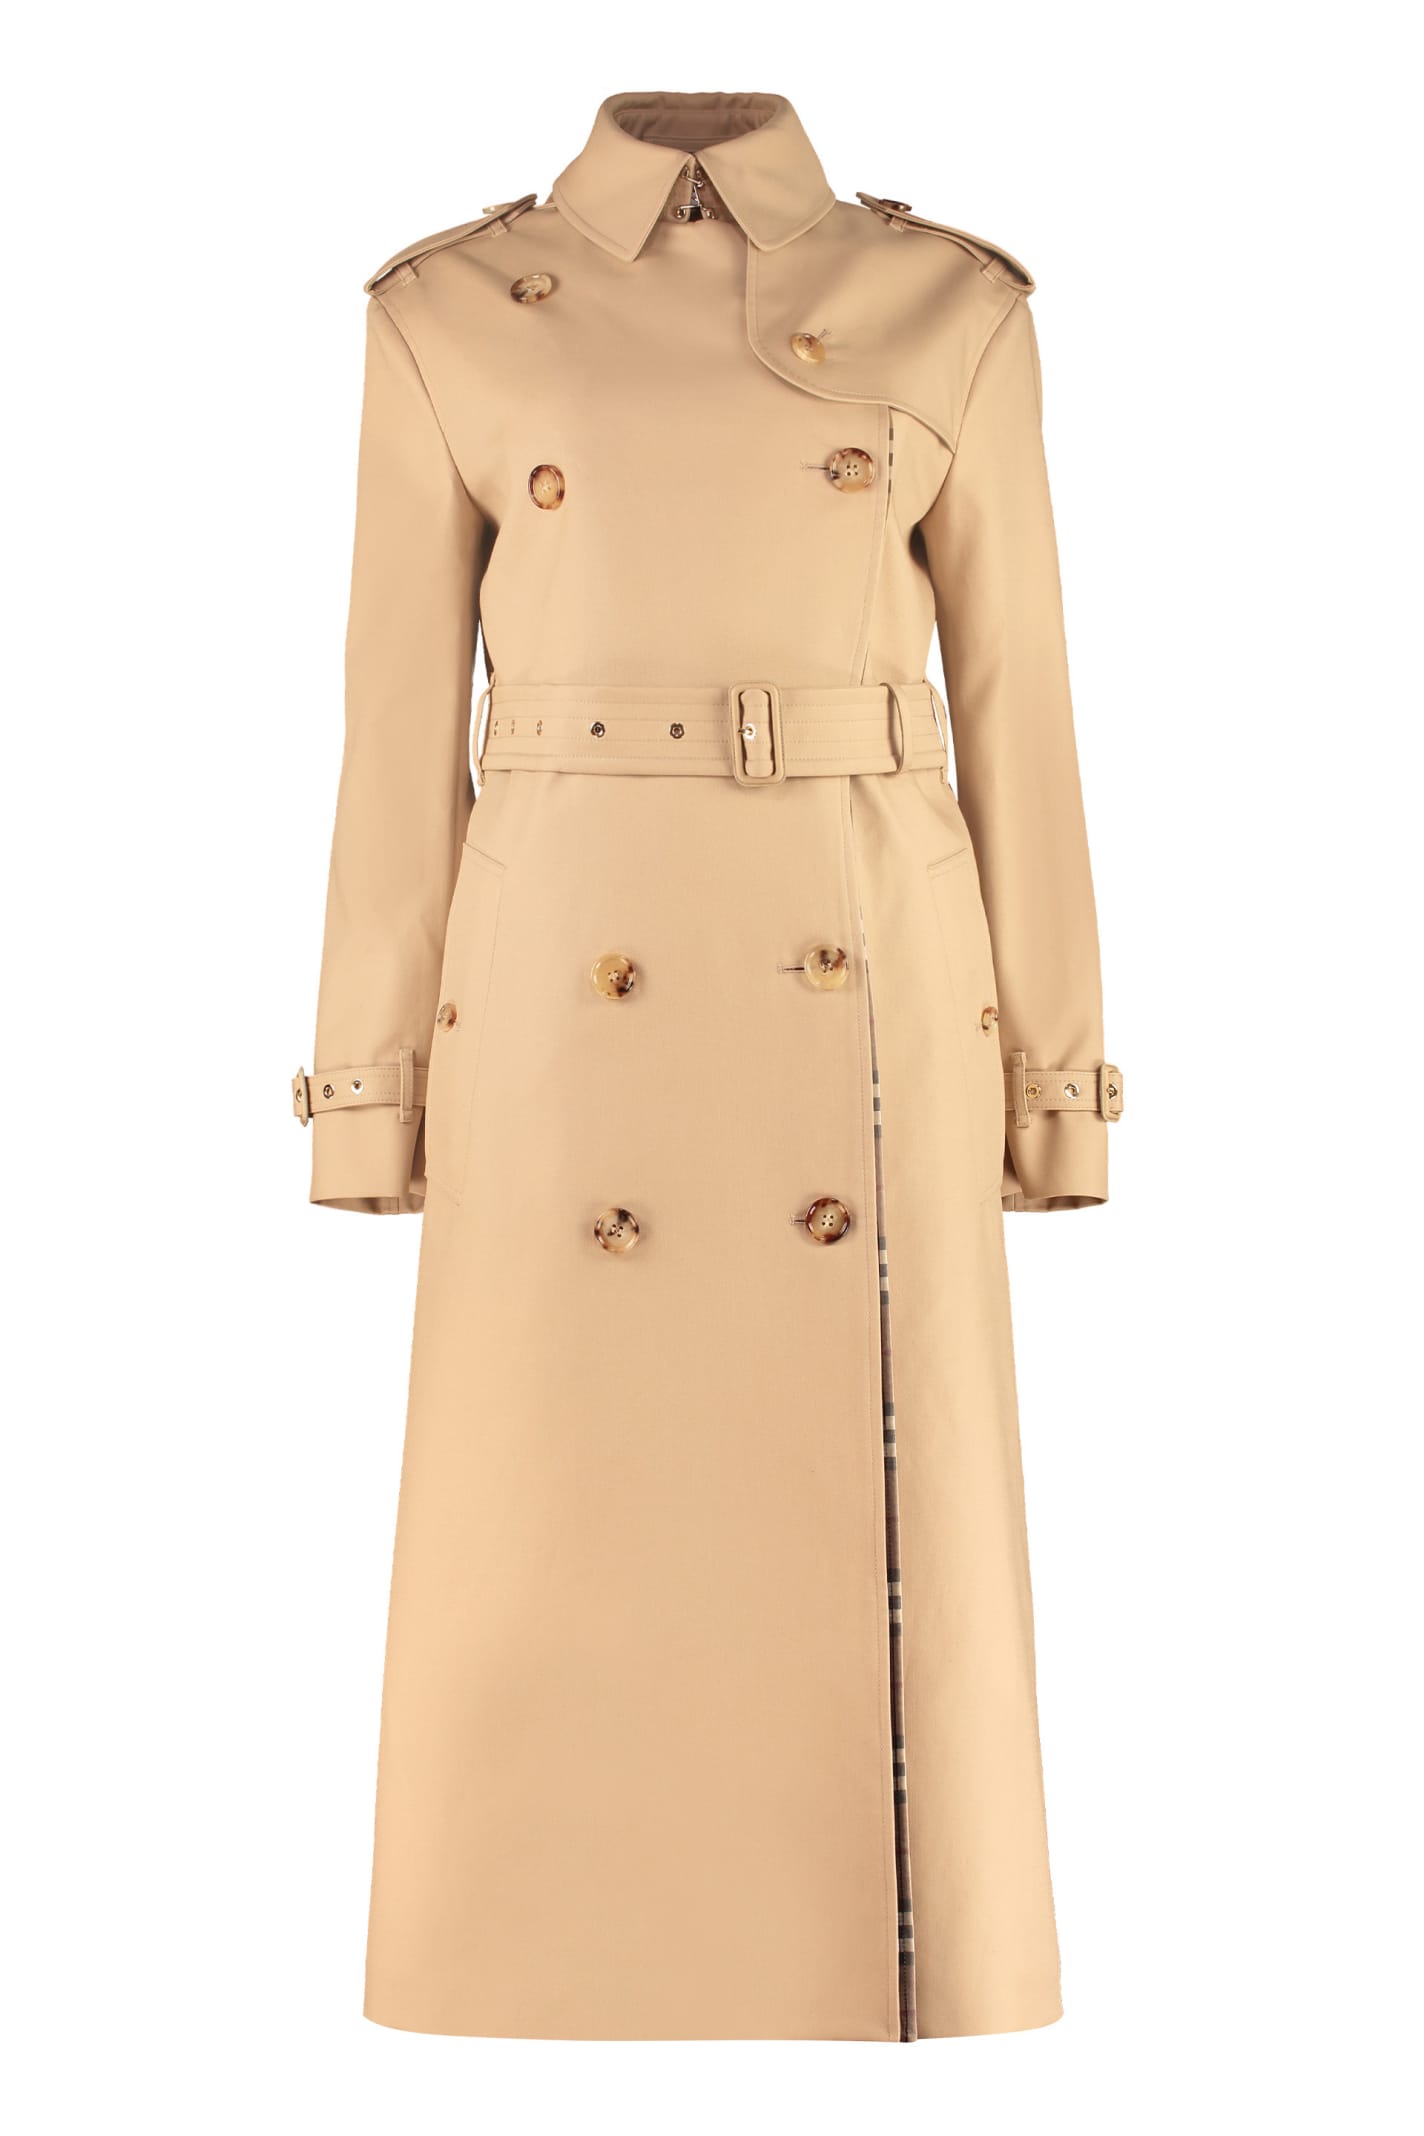 BURBERRY WATERLOO TRENCH COAT,4566065115783 A8740